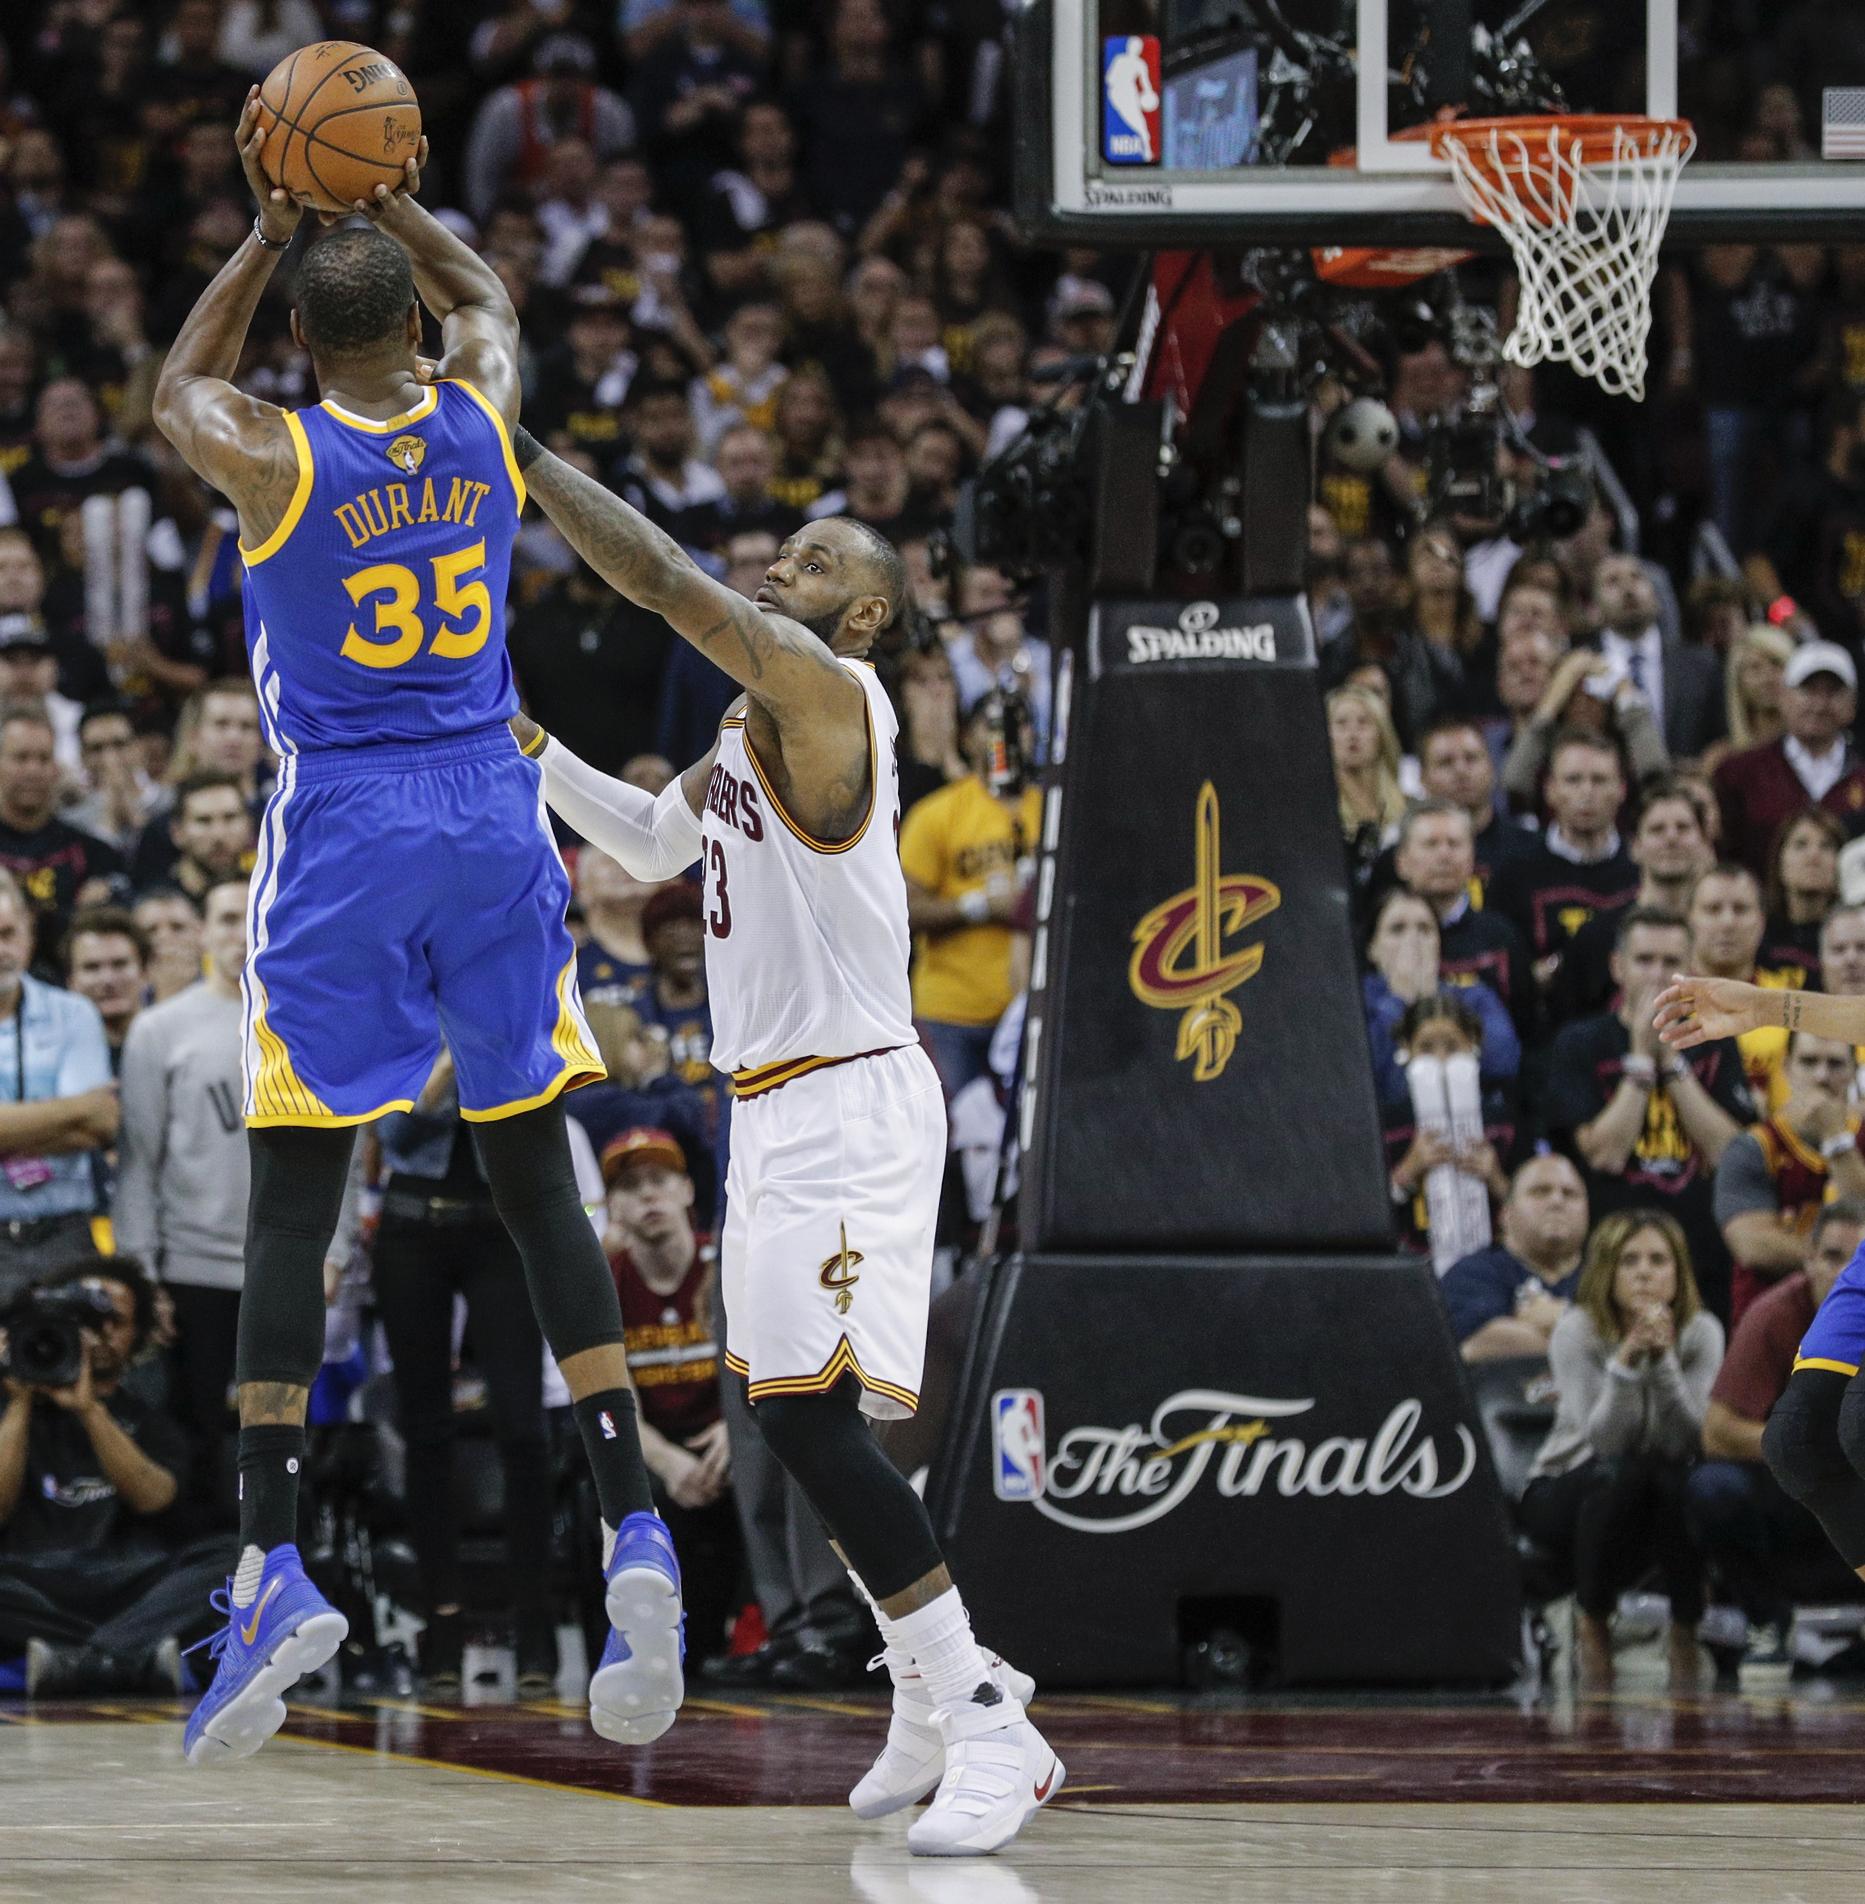 Durant takes over Game 3 finale, makes shots that seal Cavs’ fate - SFGate